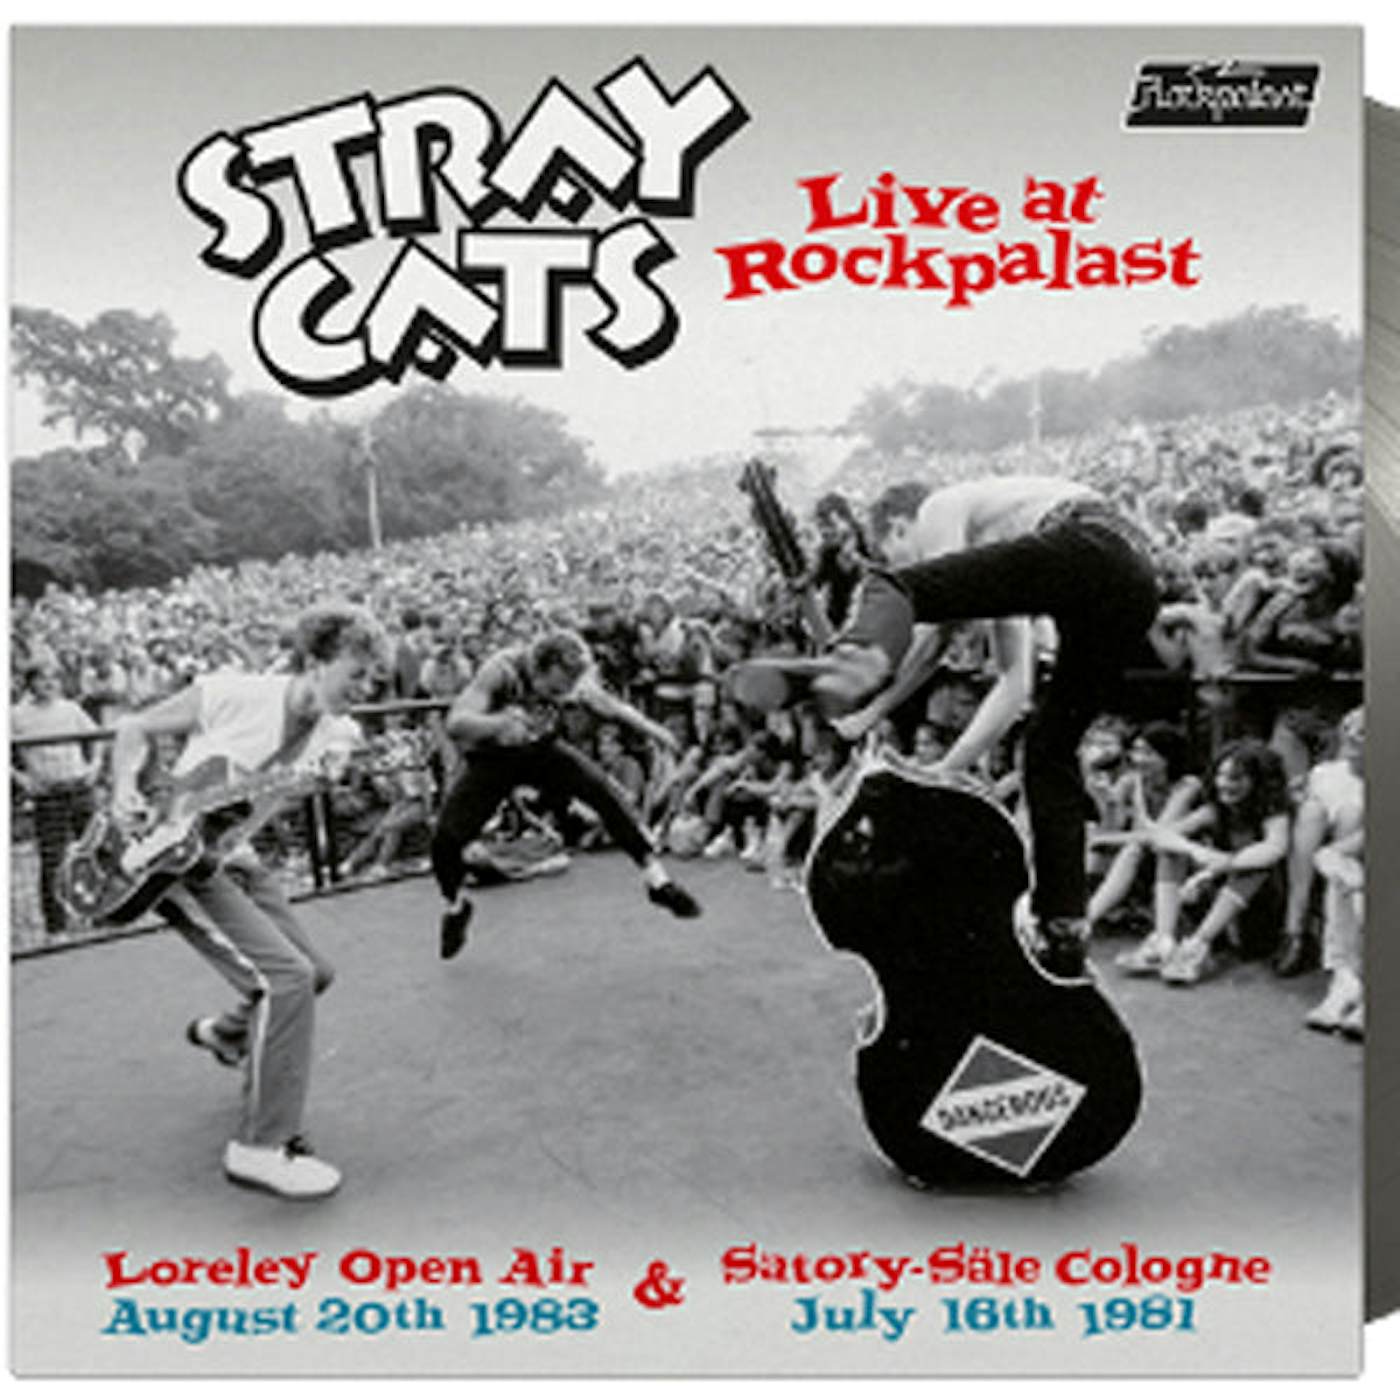 Stray Cats LP - Live At Rockpalast (3Lp Coloured) (Vinyl)